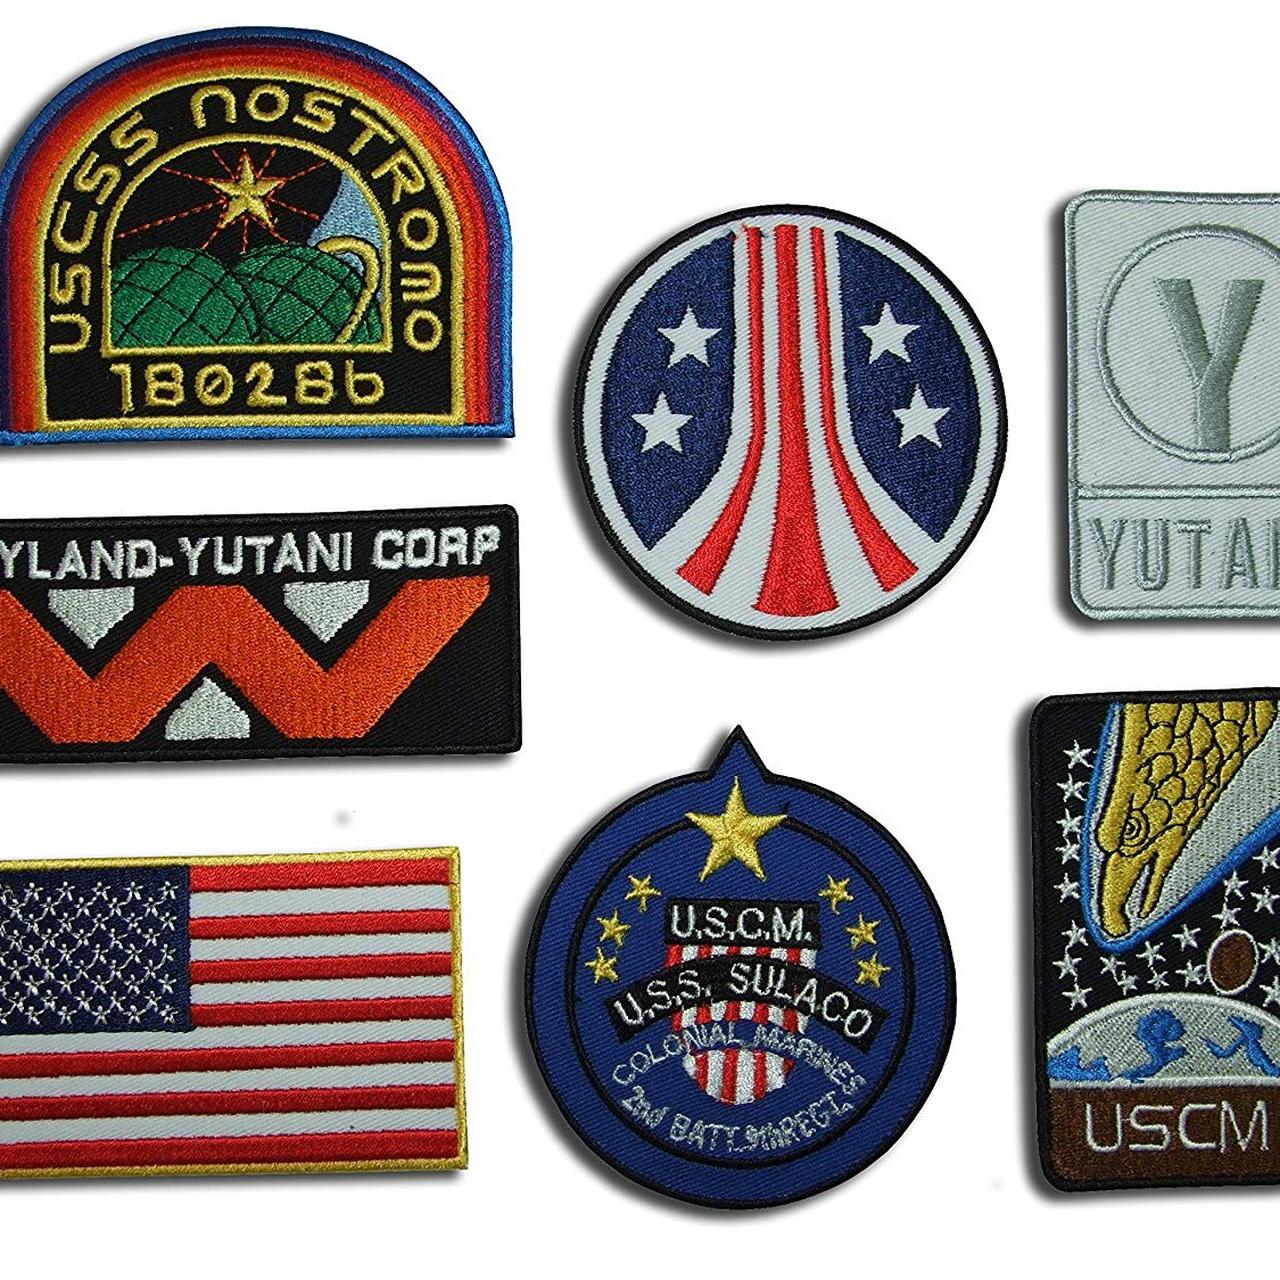 Aliens Movie USCM USS Sulaco Colonial Marines Patch Set of 4 